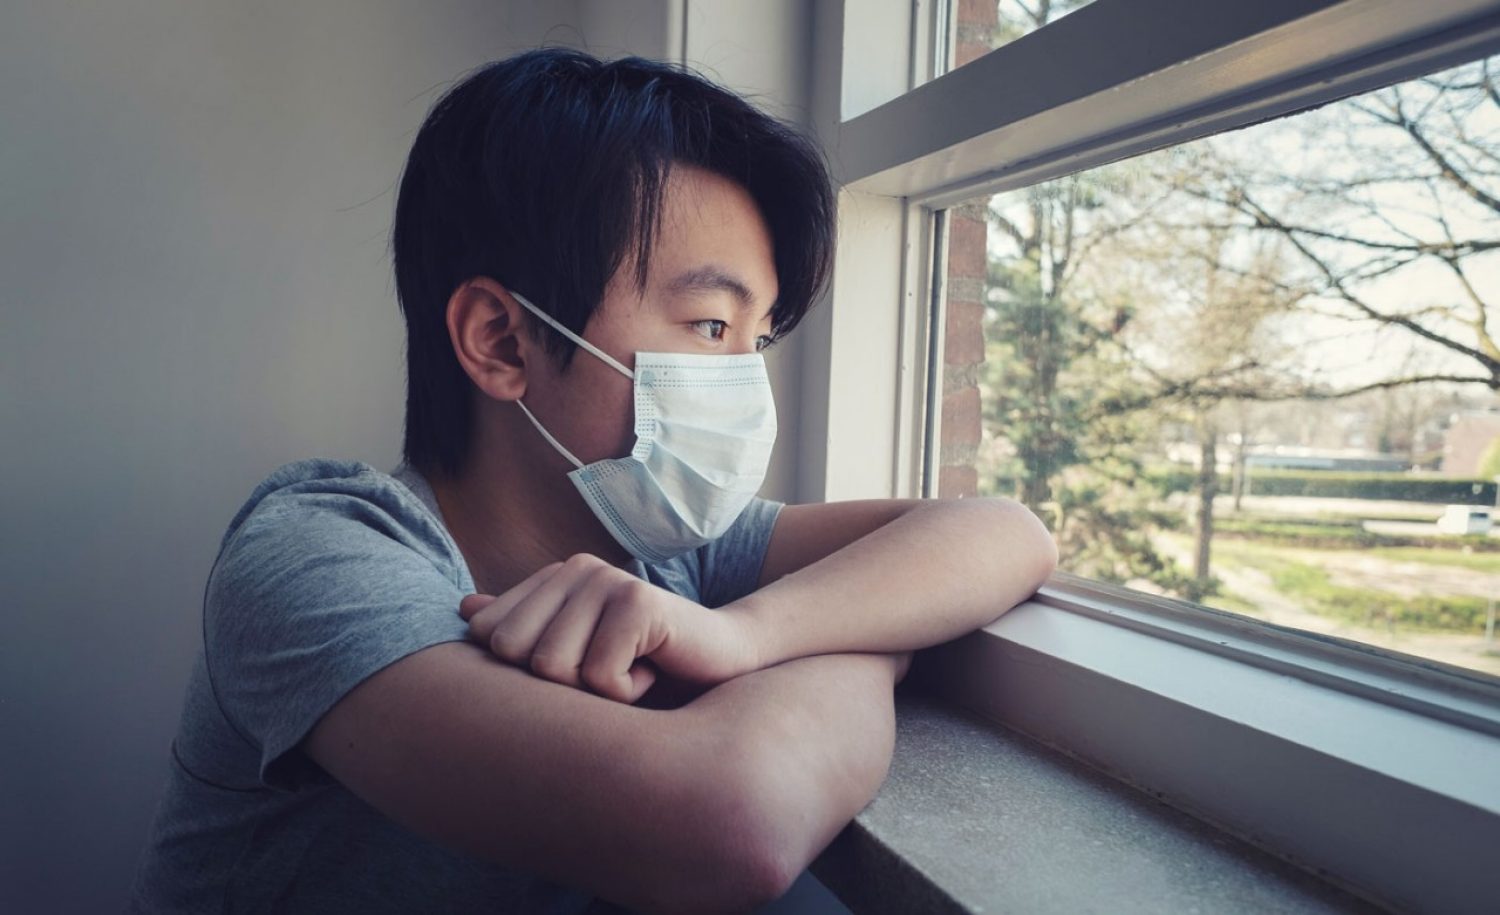 Young man in a medical mask at a window with grass and trees outside